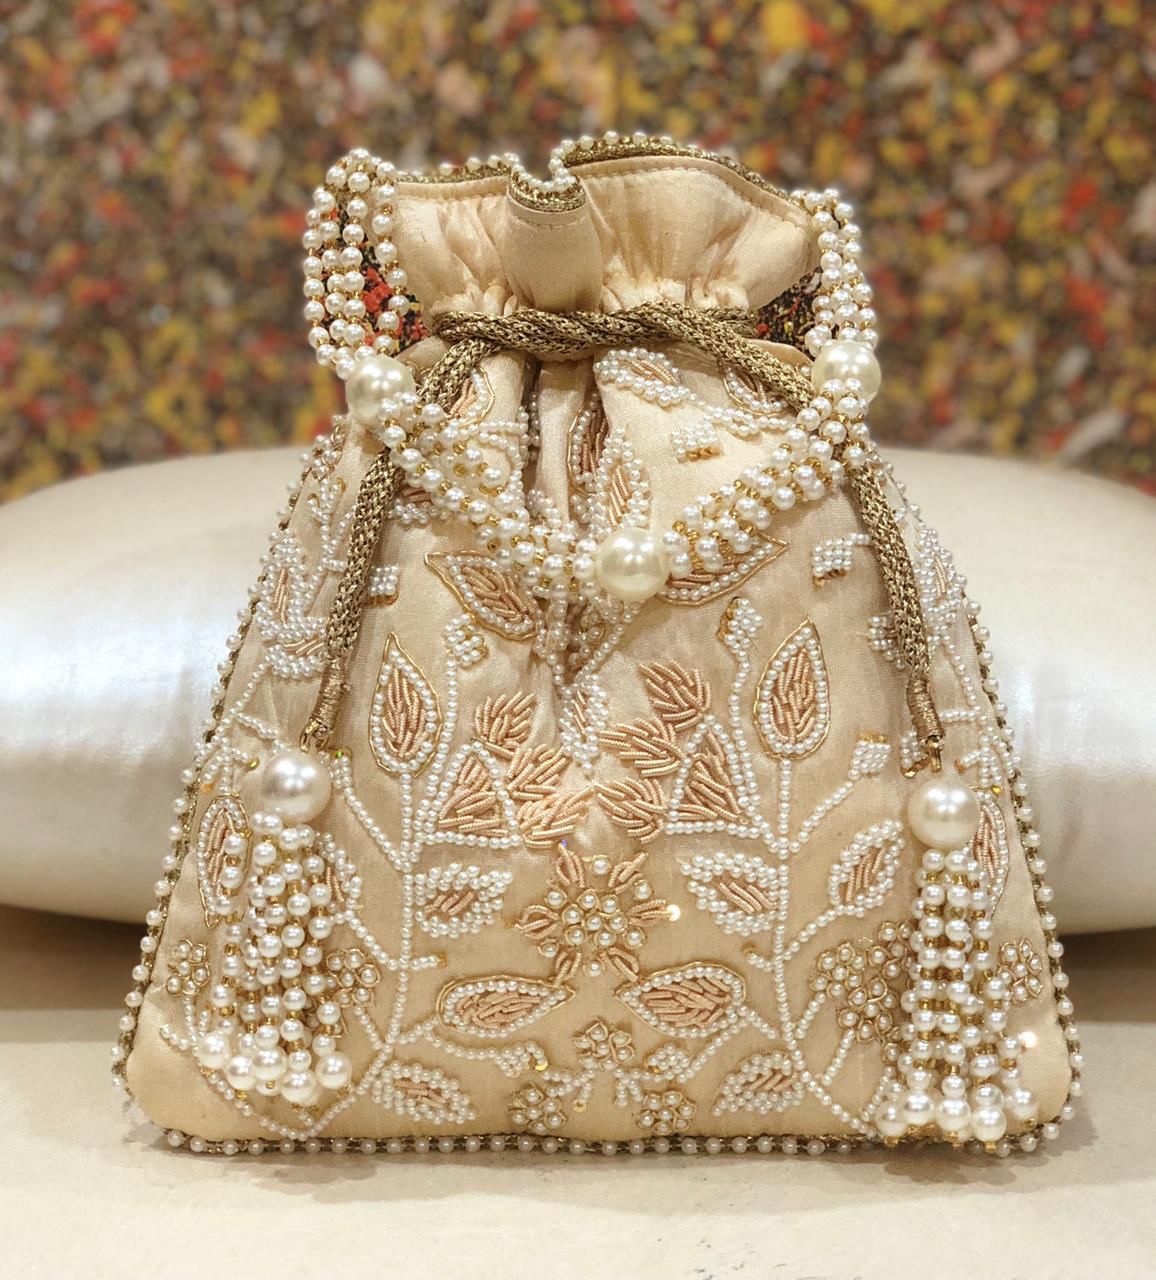 Bridal Clutches, Purses, and Handbags to Carry on Your Big Day | Vogue